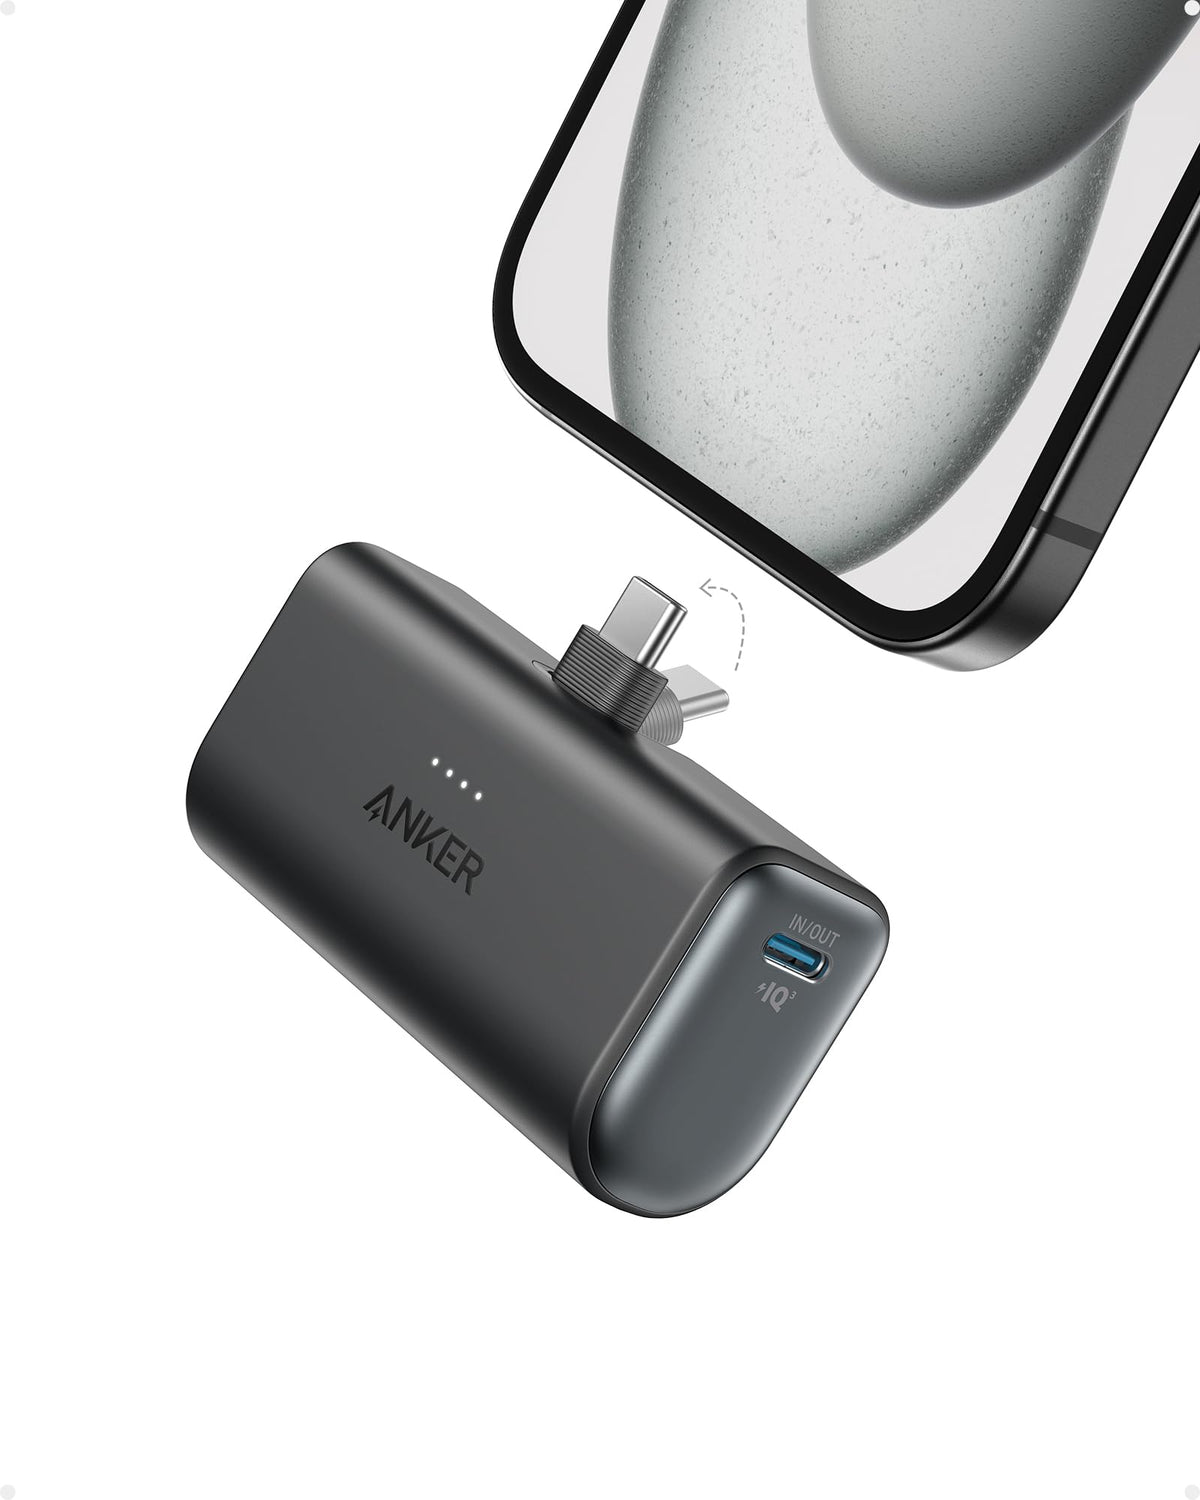 Anker Nano Power Bank (22.5W, Built-In USB-C Connector) and Sport X10